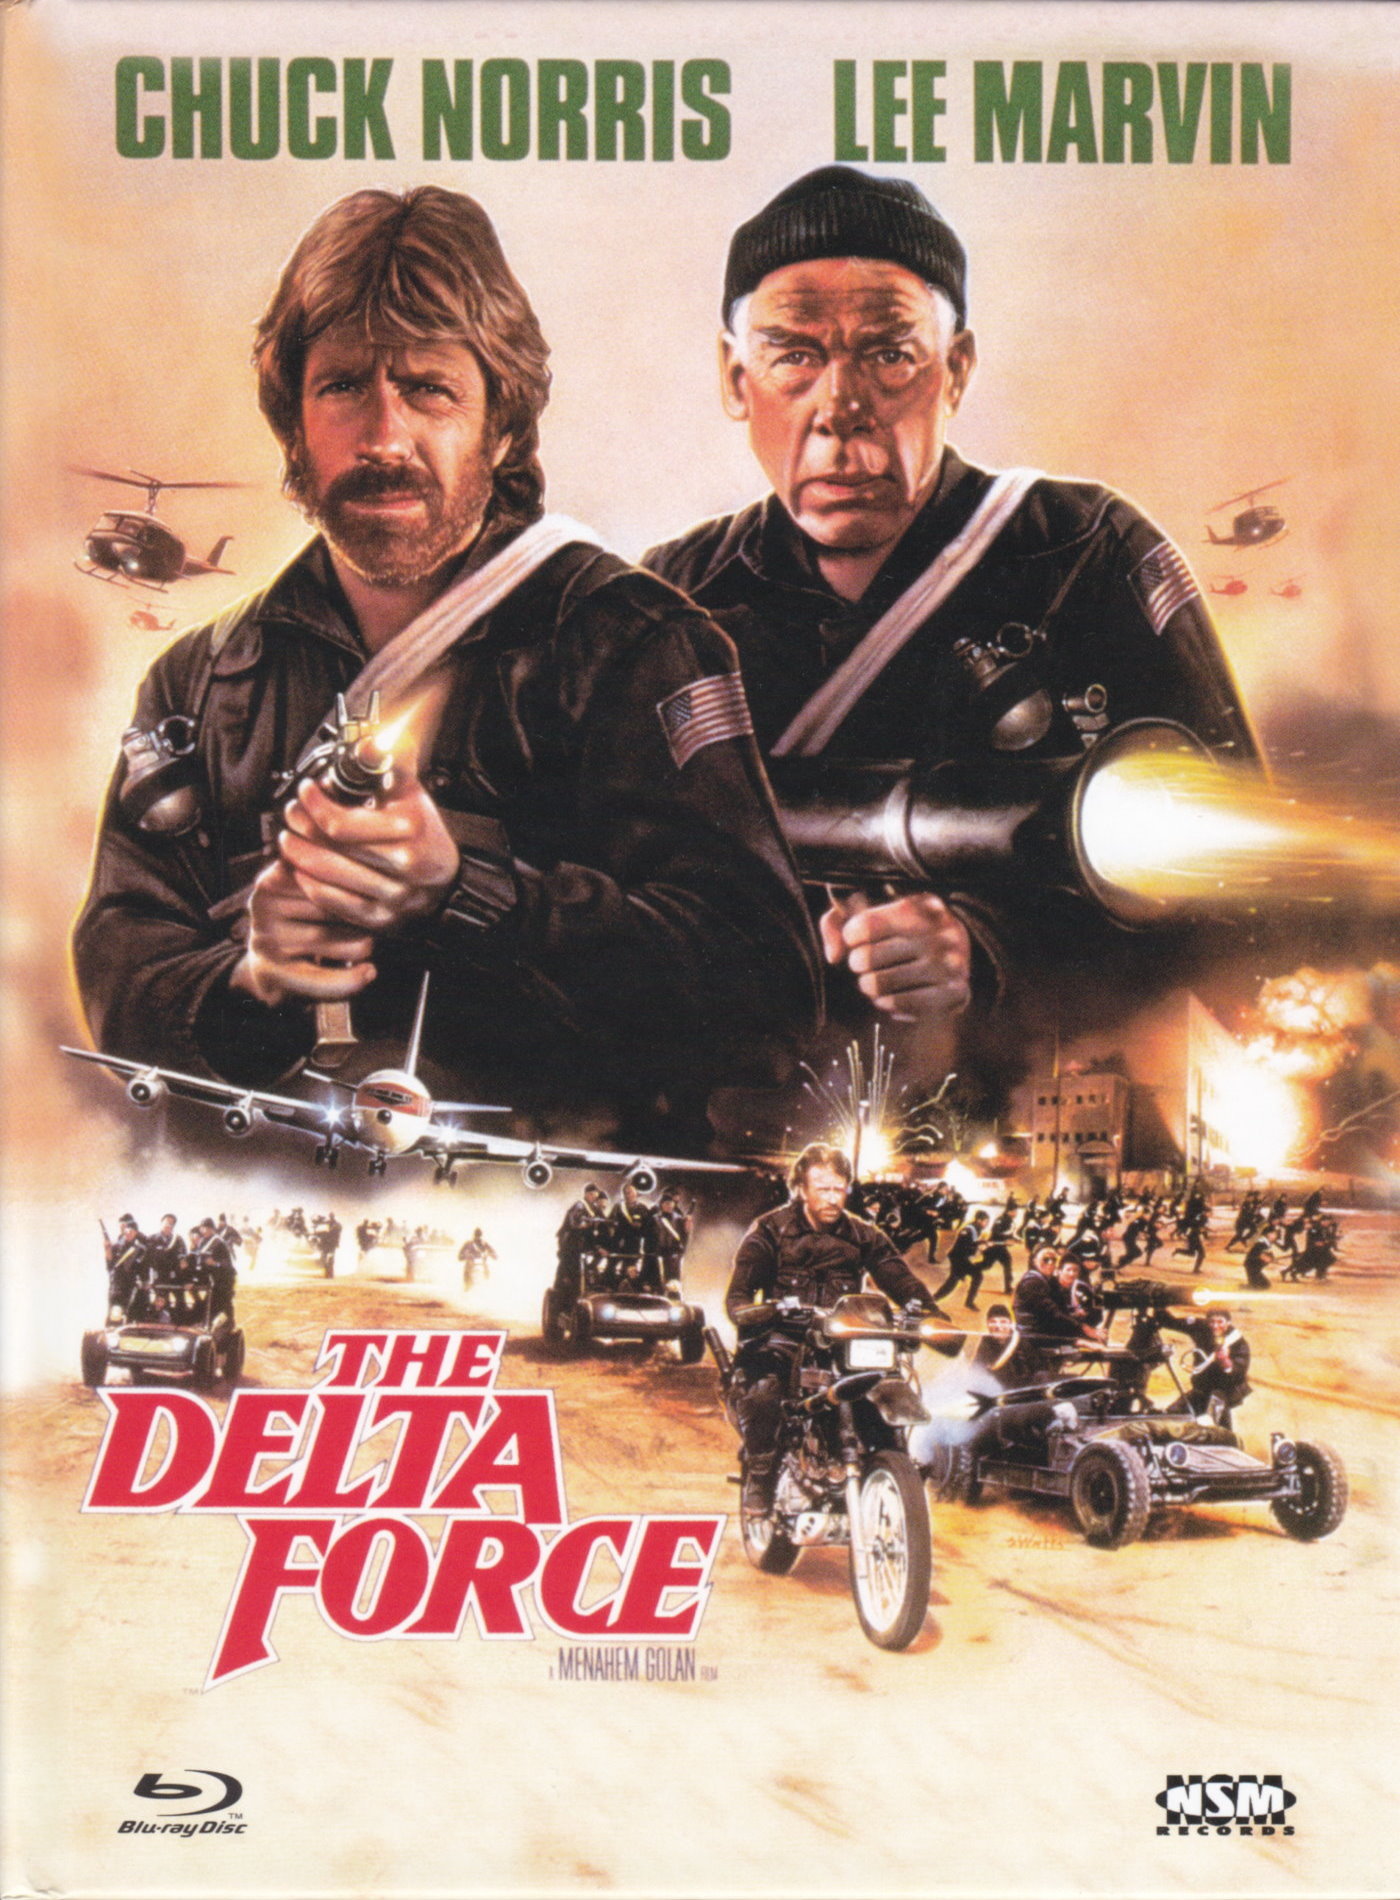 Cover - The Delta Force.jpg